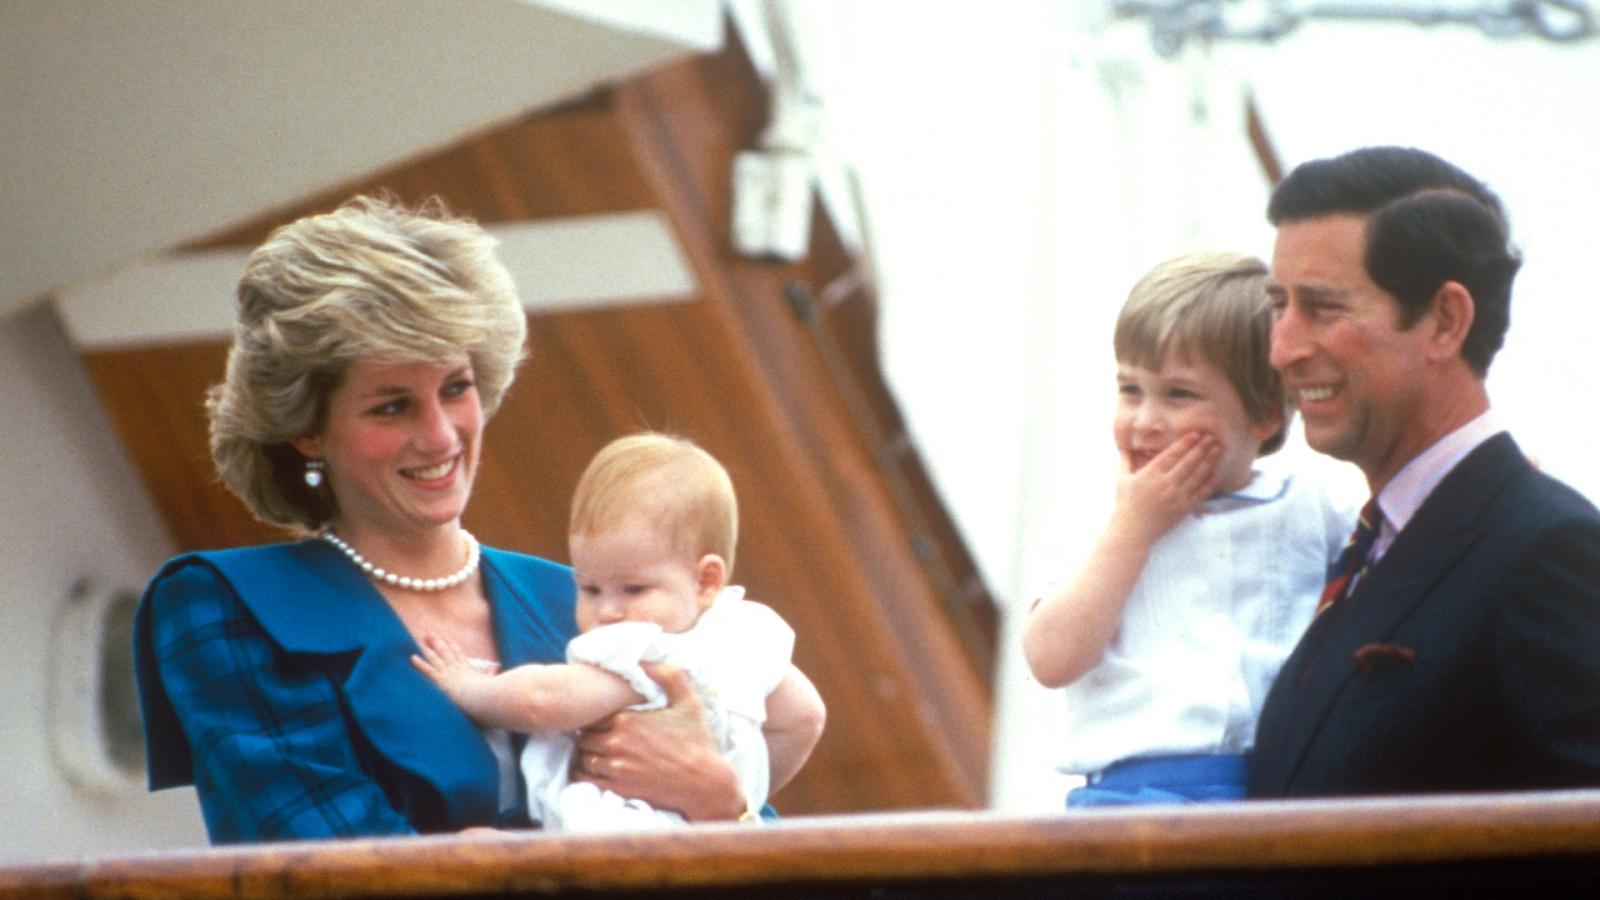 A Royal Rebel: How Princess Diana Defied Protocol for Harry and William - image 1